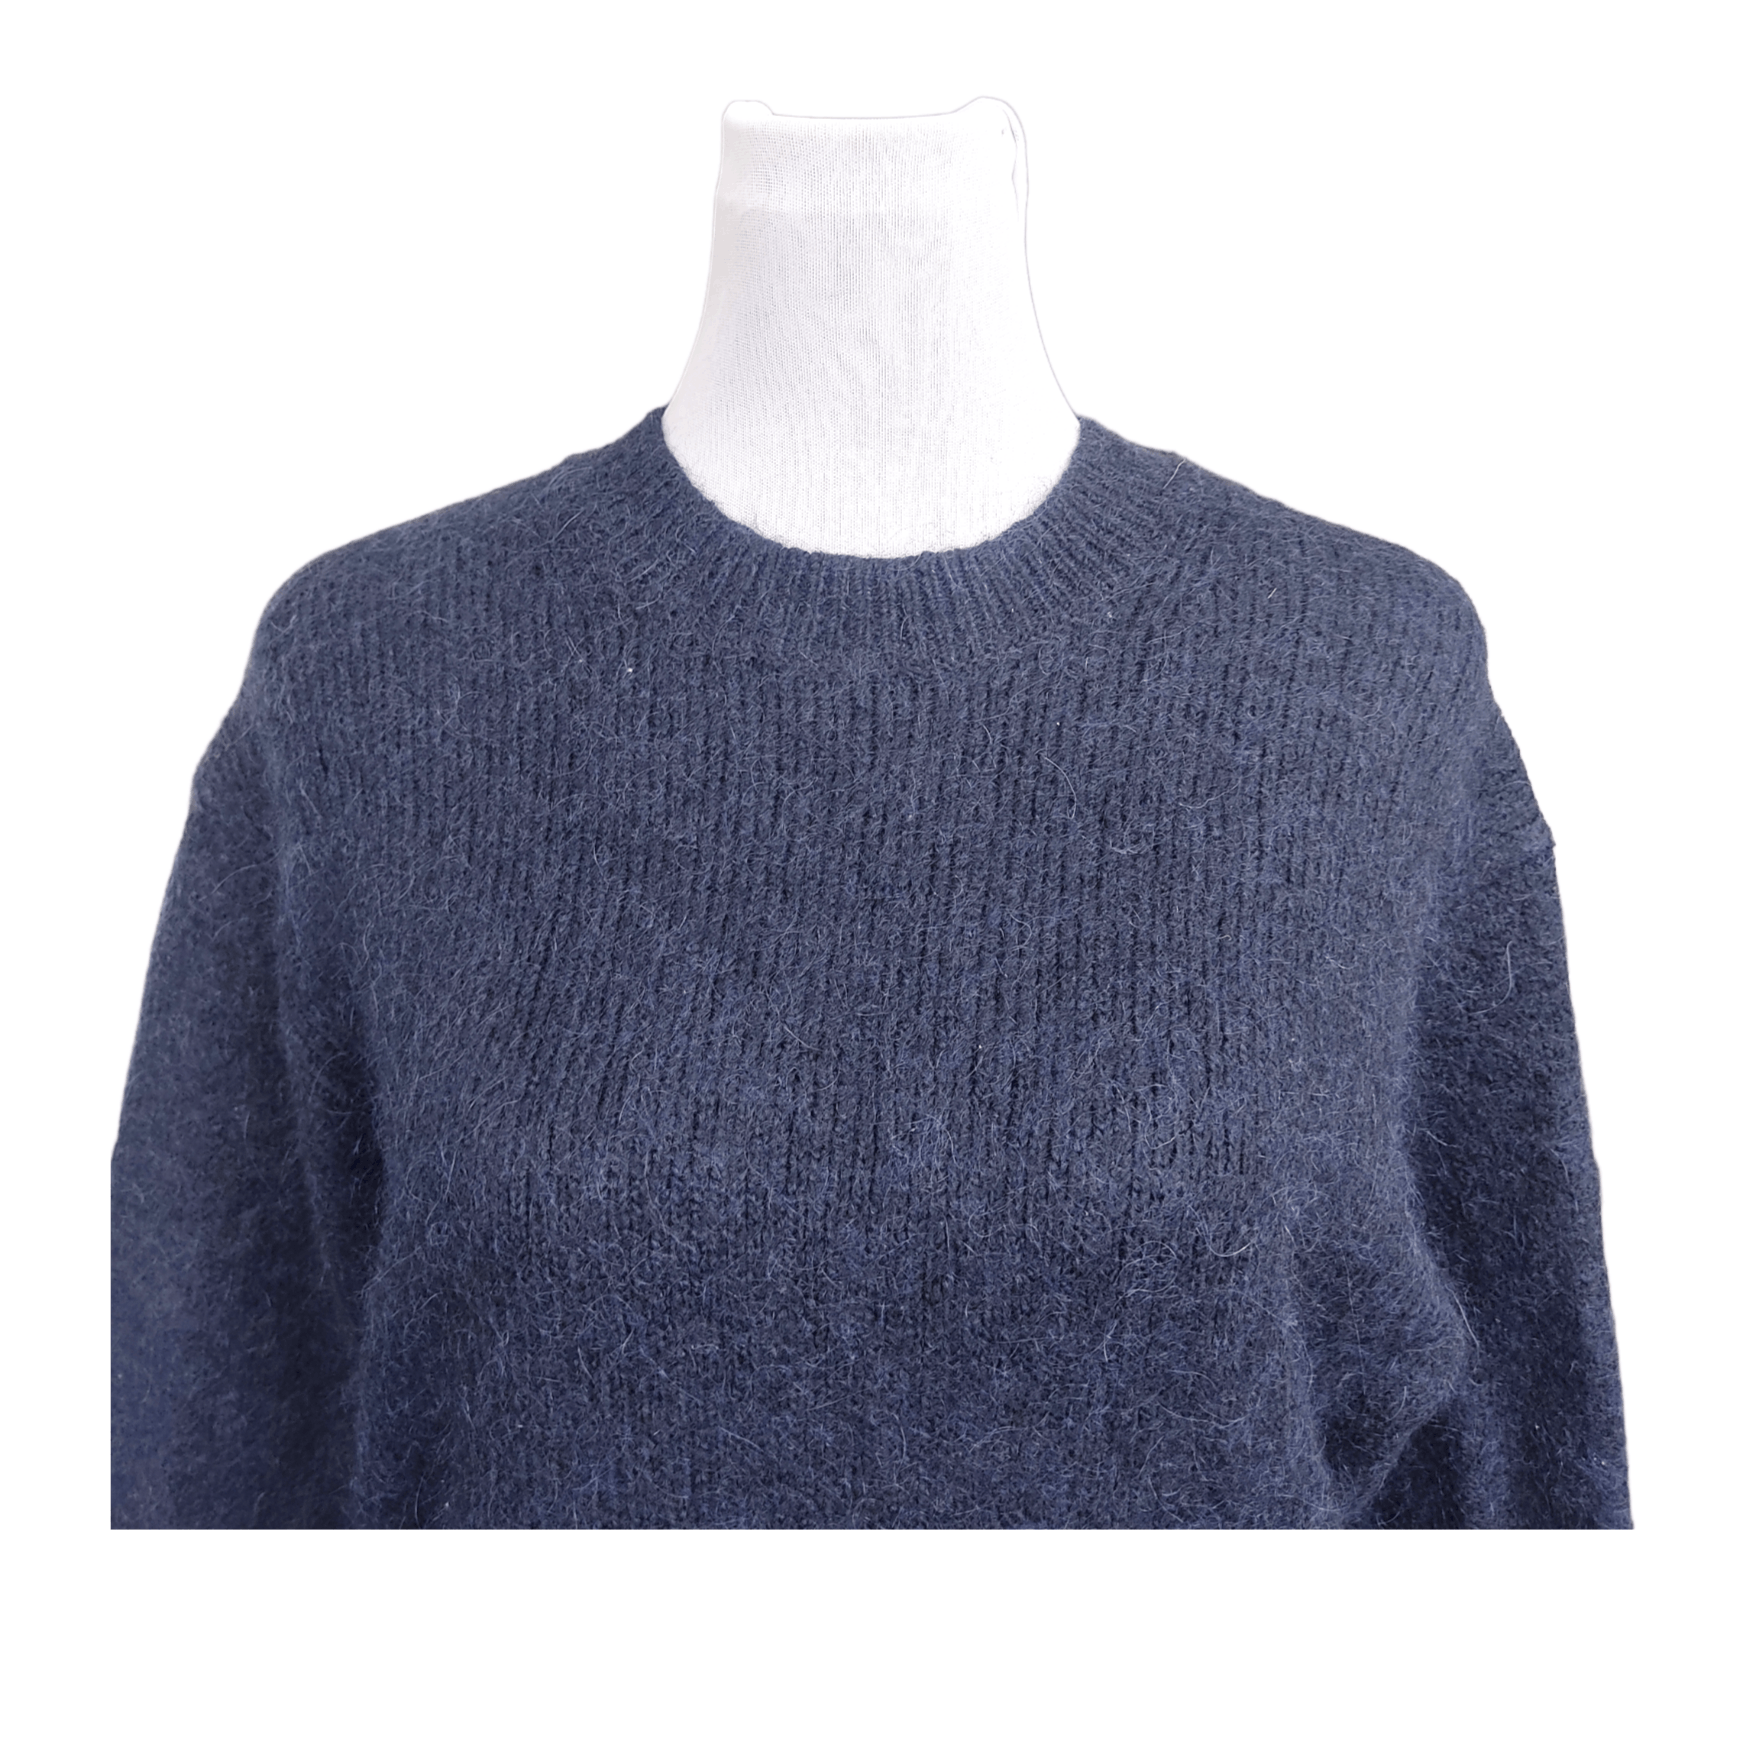 Uniqlo UUU x LEMAIRE Under Cover Mohair Wool Knitted Sweater - 3